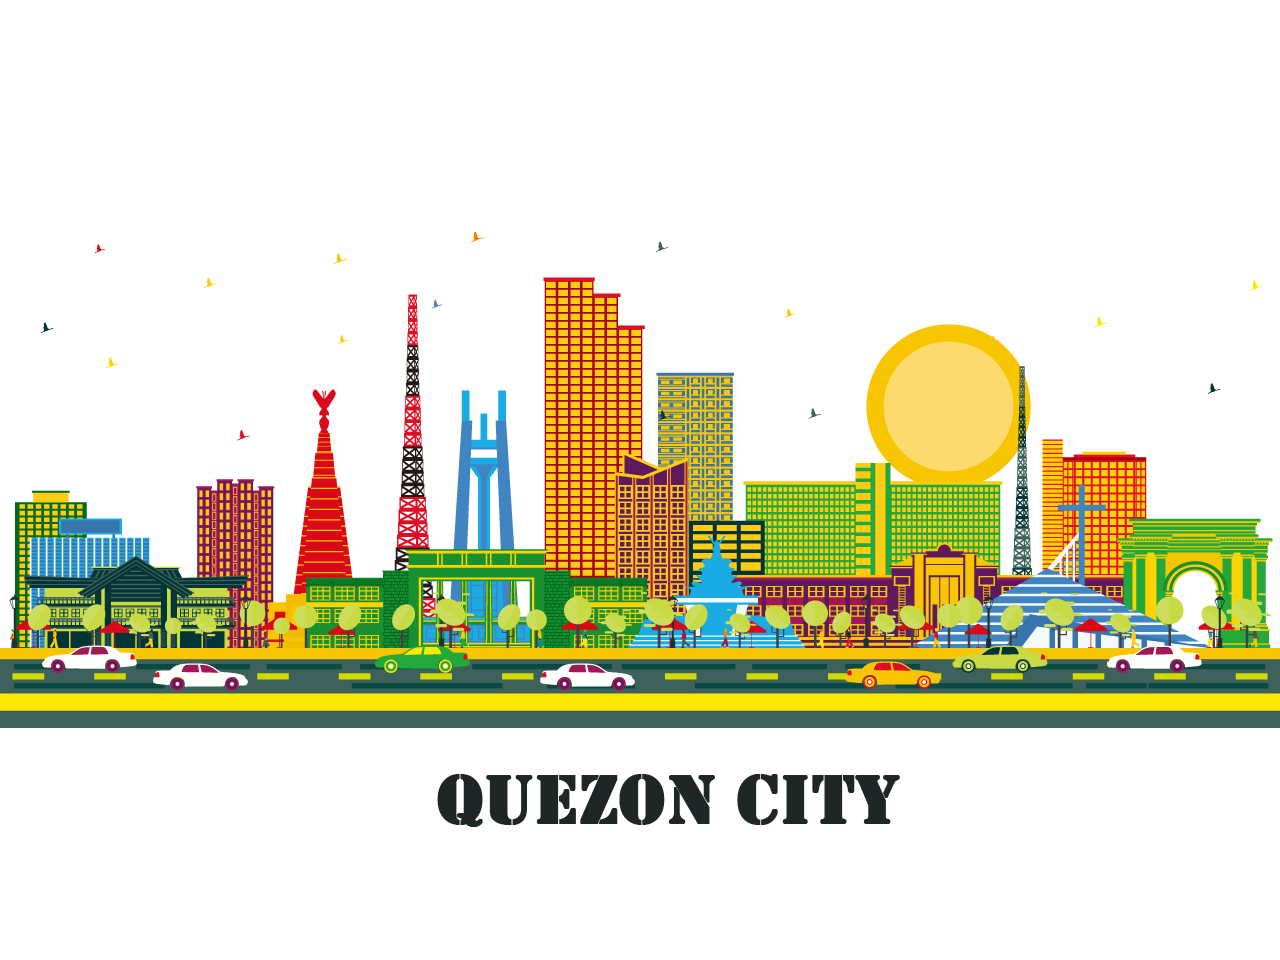 Quezon city philippines city skyline with color buildings travel tourism illustration with modern architecture